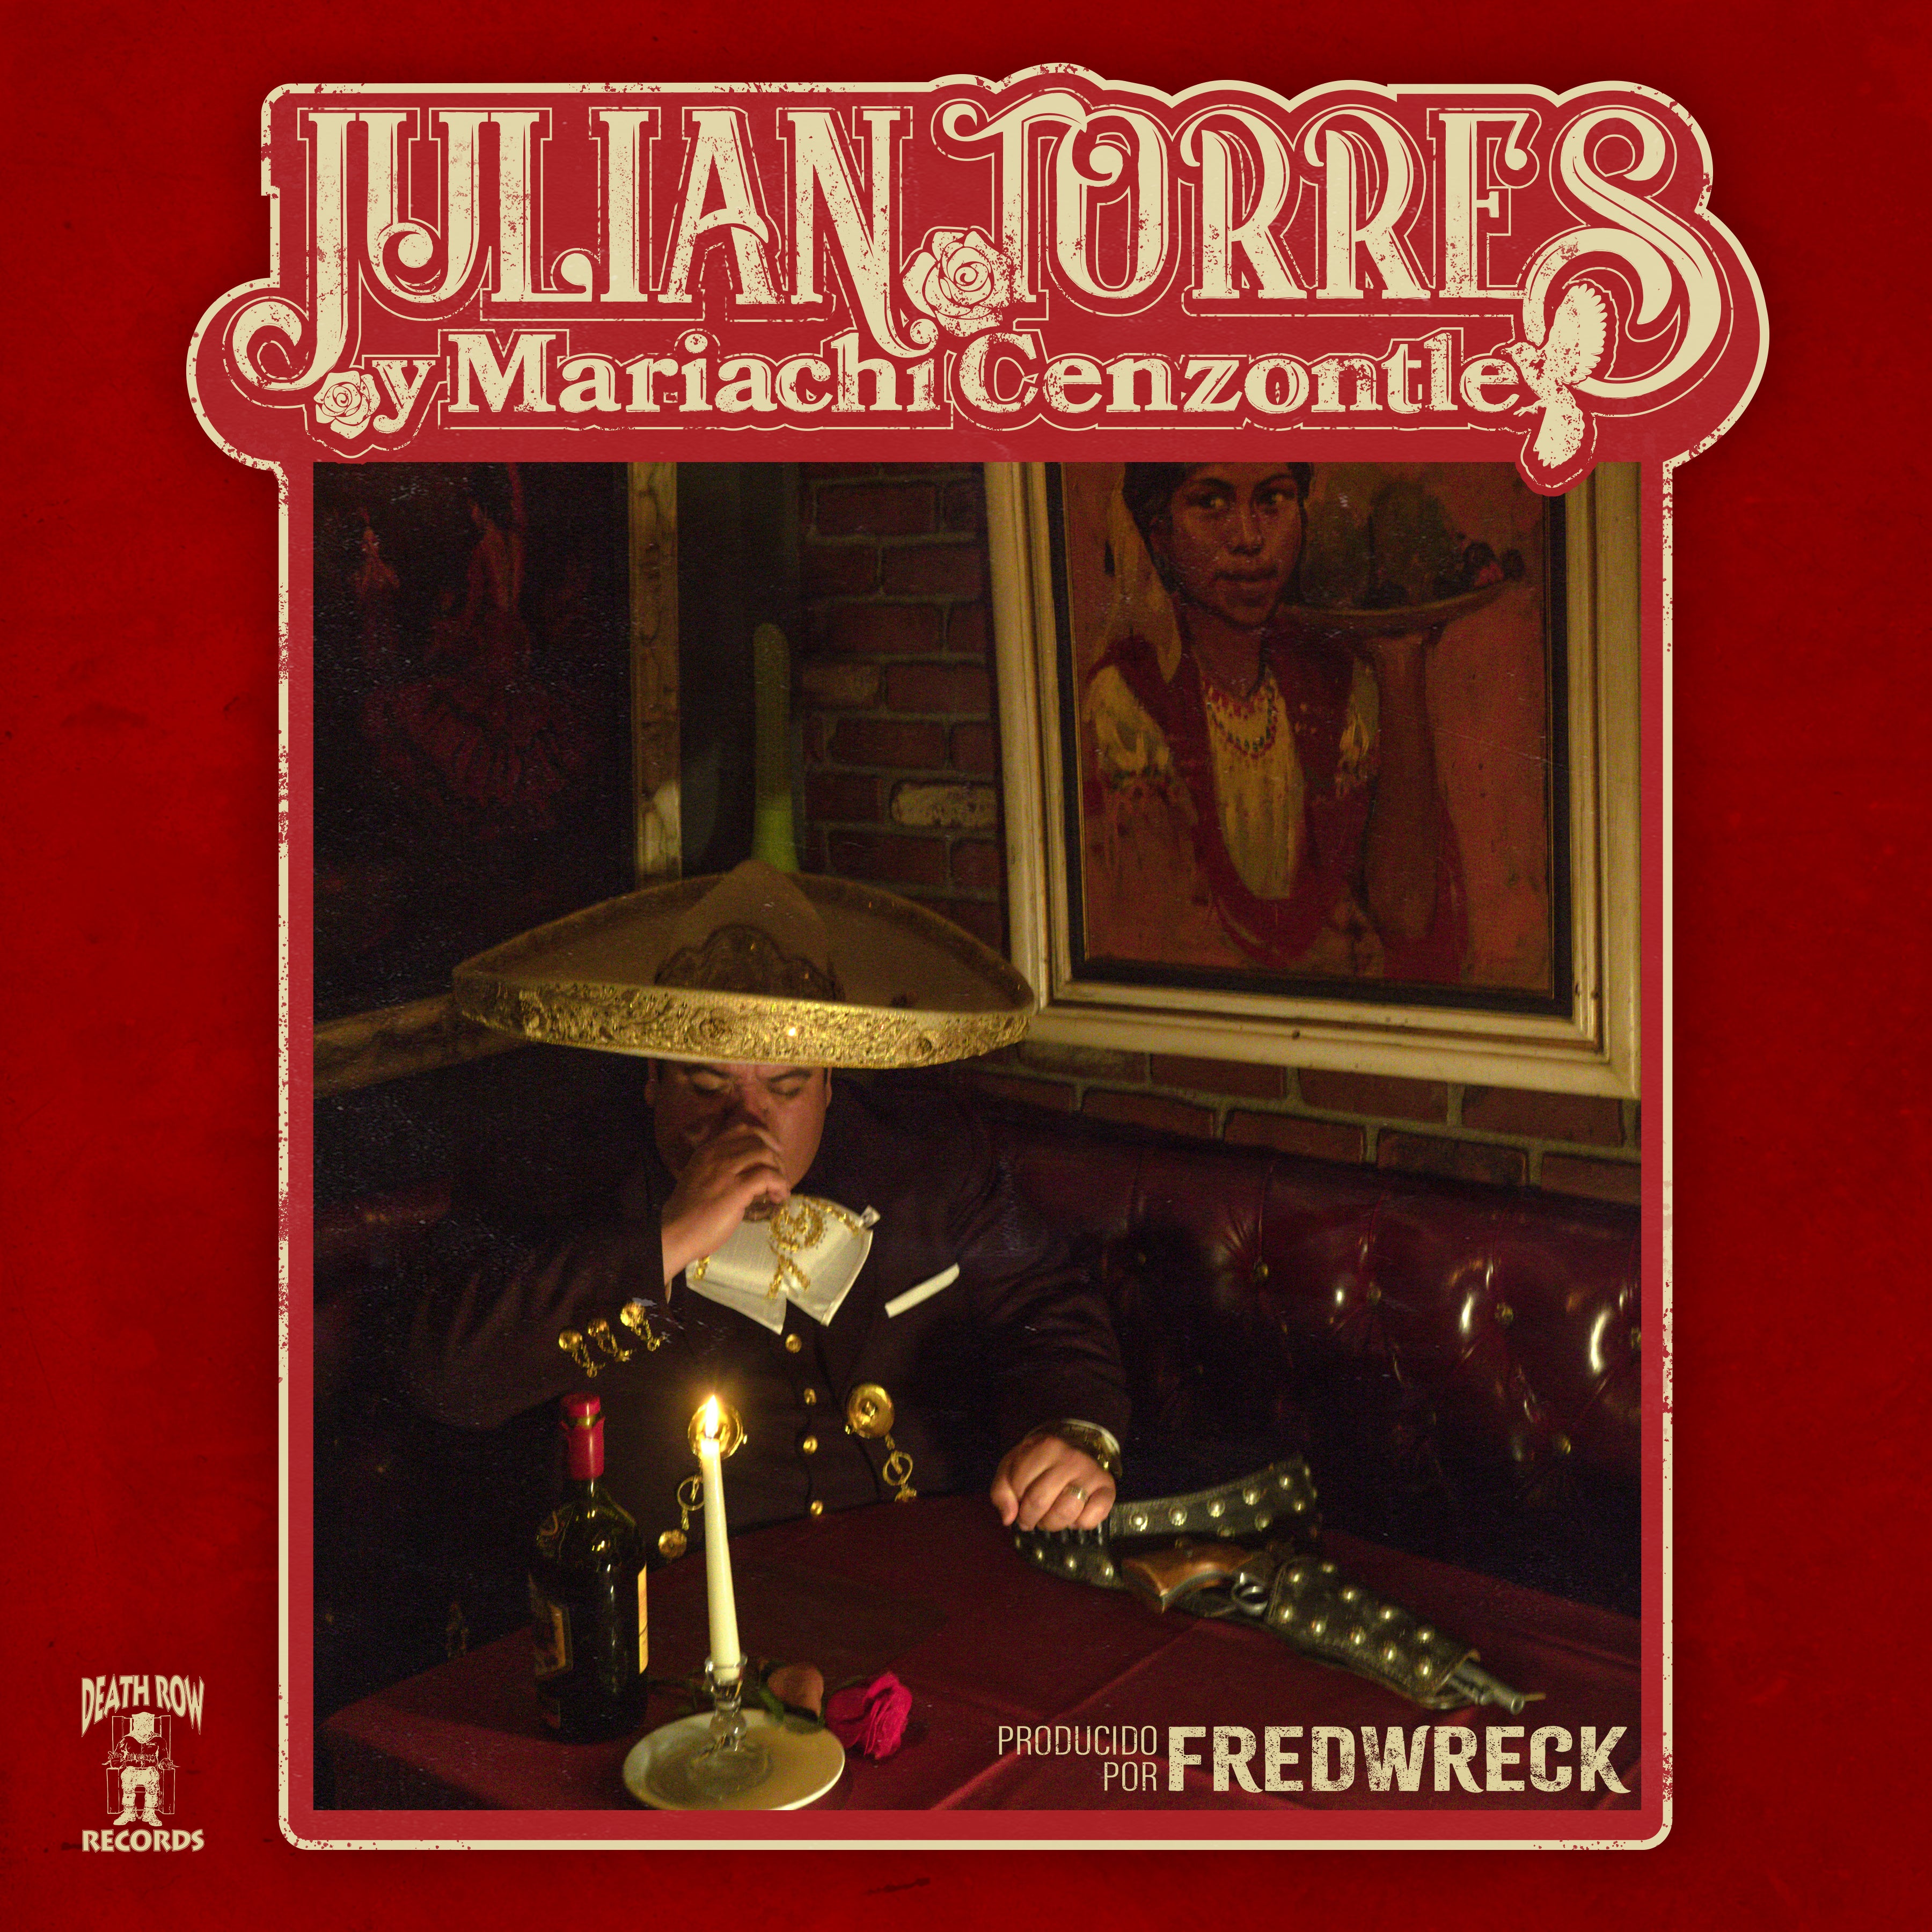 Julian Torres Y Mariachi Cenzontle” EP-Limited Edition Vinyl